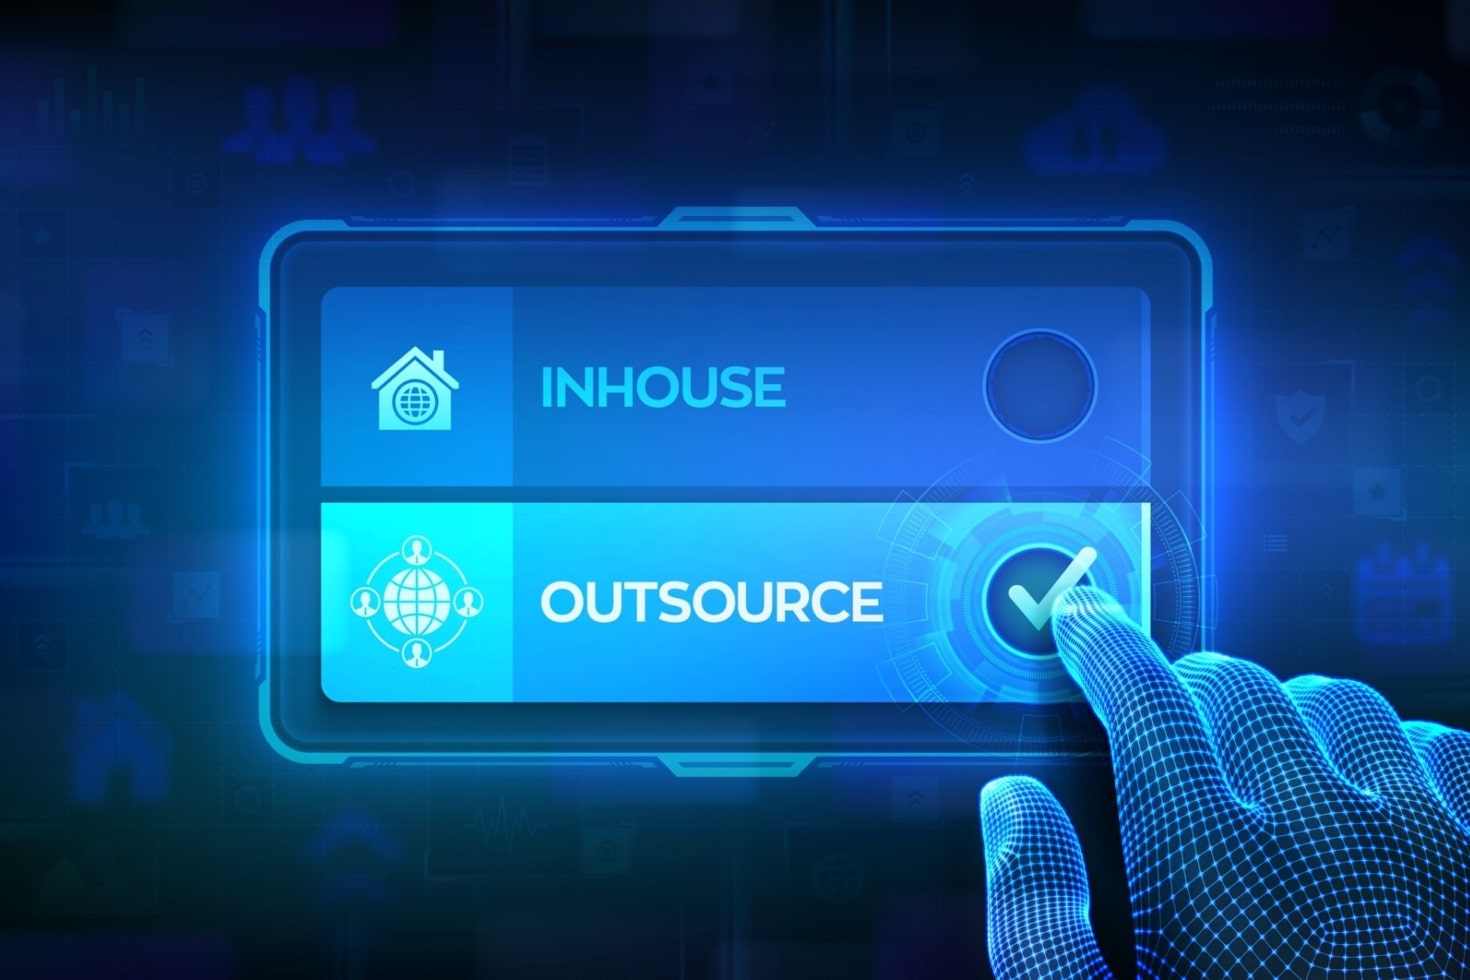 Hand on touch screen checking on outsource button, outsourcing vs in-house